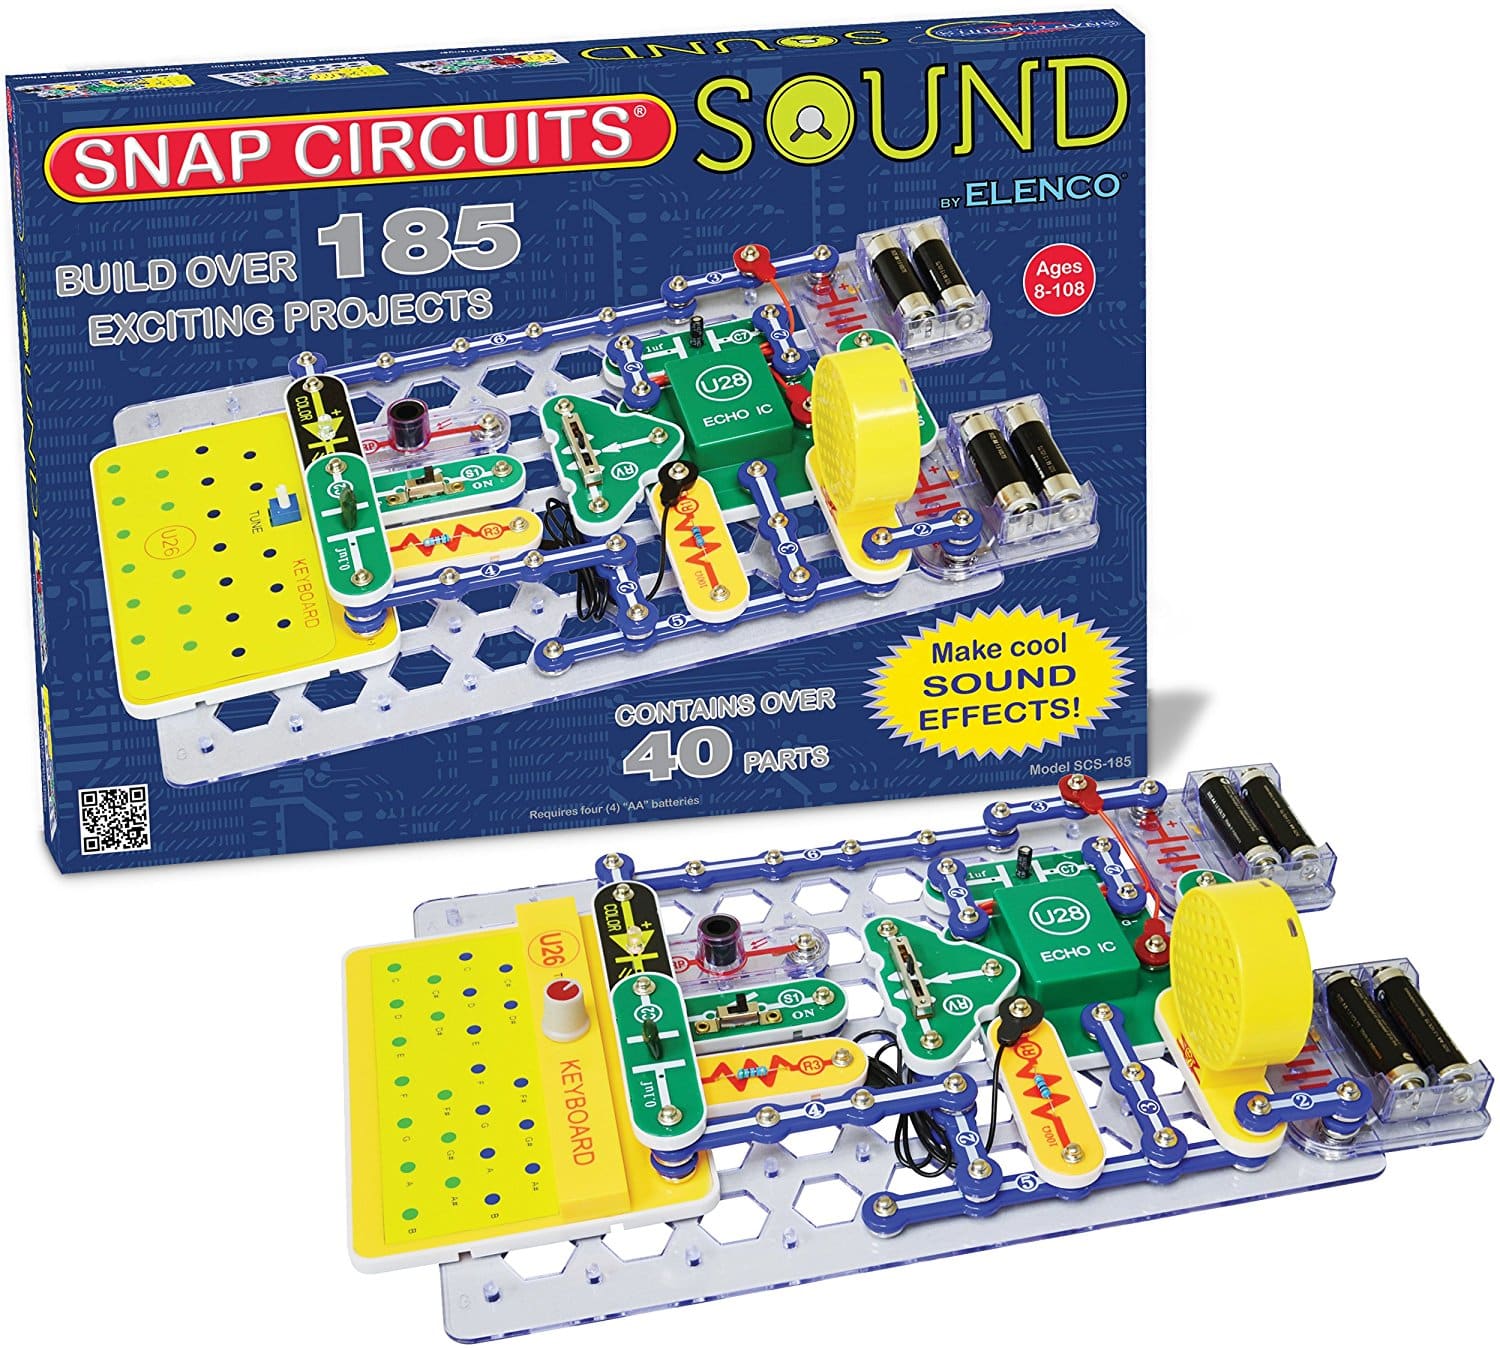 DEAL ALERT: Snap Circuits Sound Electronics Discovery Kit – 35% off!